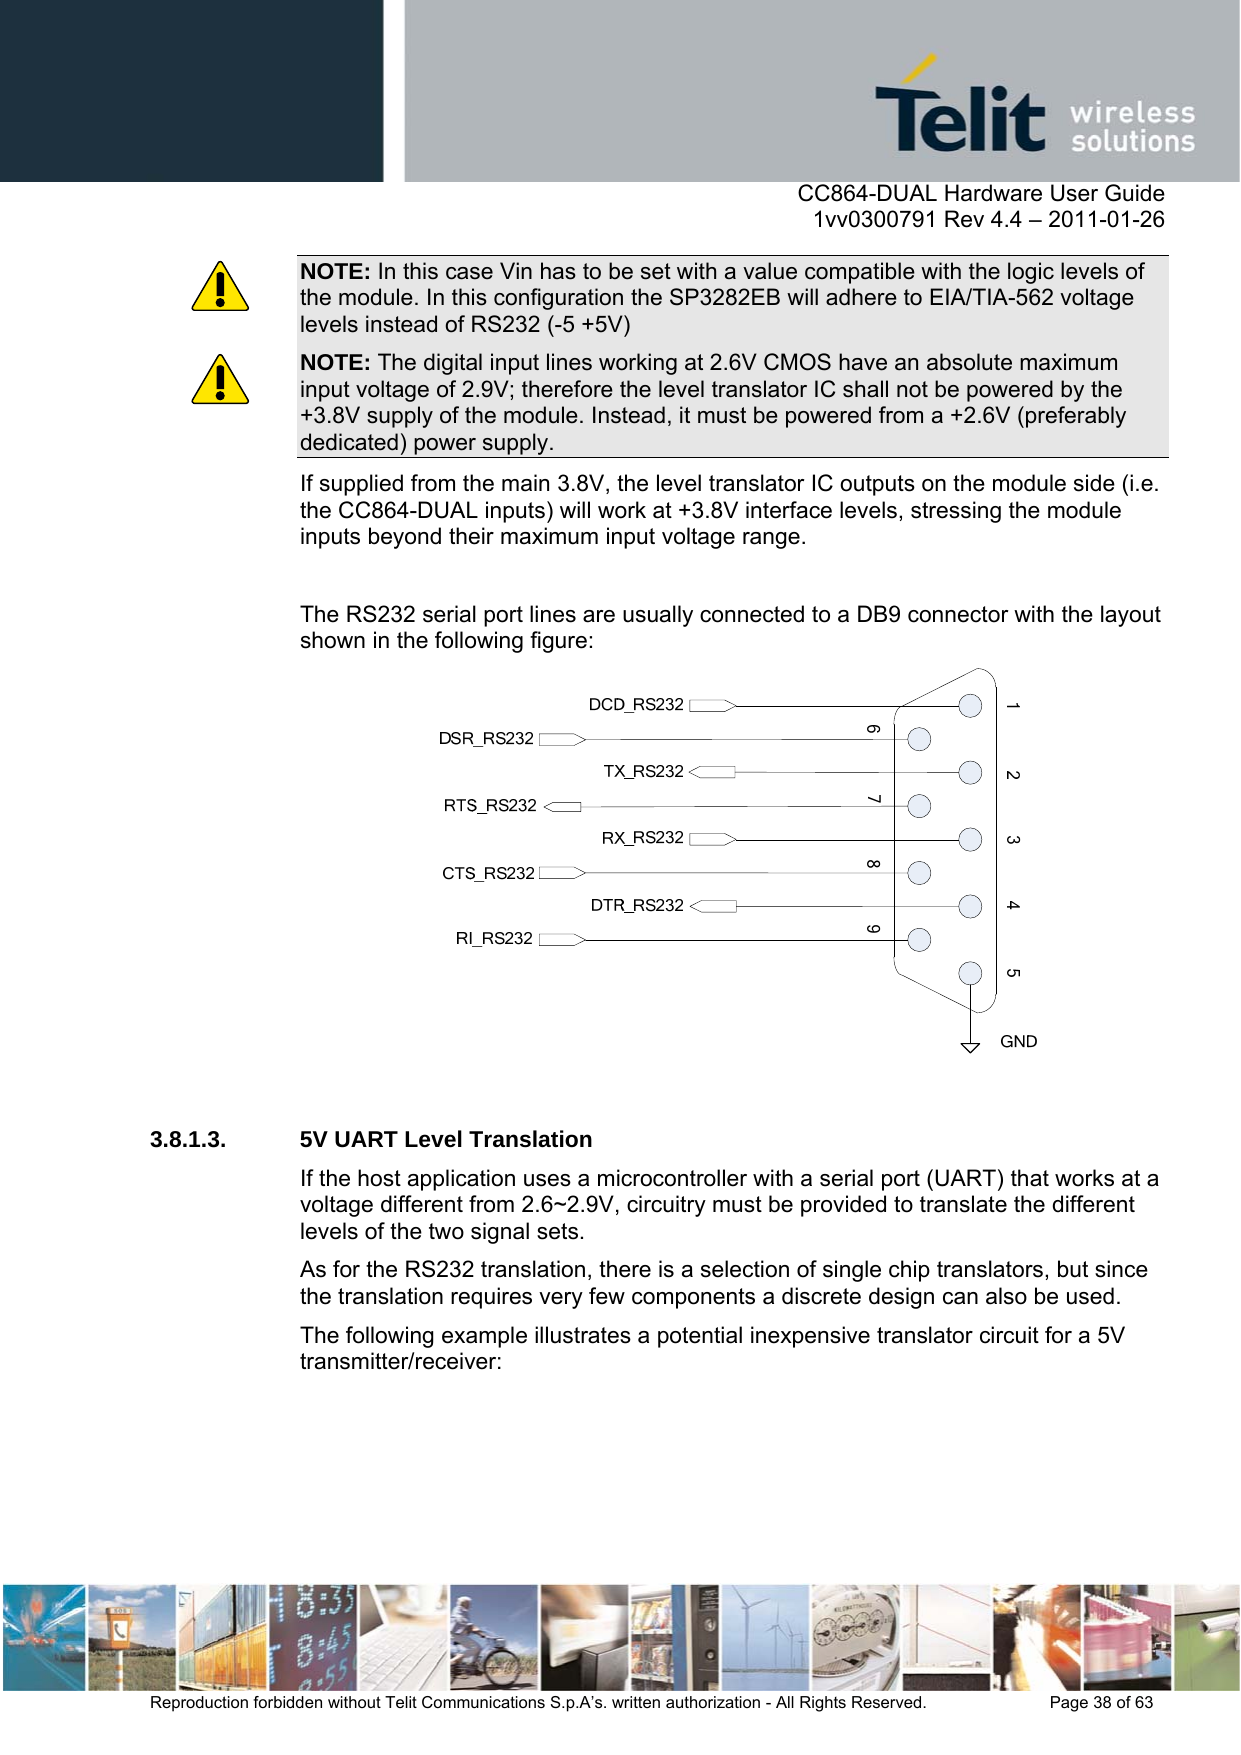      CC864-DUAL Hardware User Guide    1vv0300791 Rev 4.4 – 2011-01-26  Reproduction forbidden without Telit Communications S.p.A’s. written authorization - All Rights Reserved.    Page 38 of 63  NOTE: In this case Vin has to be set with a value compatible with the logic levels of the module. In this configuration the SP3282EB will adhere to EIA/TIA-562 voltage levels instead of RS232 (-5 +5V) NOTE: The digital input lines working at 2.6V CMOS have an absolute maximum input voltage of 2.9V; therefore the level translator IC shall not be powered by the +3.8V supply of the module. Instead, it must be powered from a +2.6V (preferably dedicated) power supply. If supplied from the main 3.8V, the level translator IC outputs on the module side (i.e. the CC864-DUAL inputs) will work at +3.8V interface levels, stressing the module inputs beyond their maximum input voltage range.  The RS232 serial port lines are usually connected to a DB9 connector with the layout shown in the following figure:   3.8.1.3.  5V UART Level Translation If the host application uses a microcontroller with a serial port (UART) that works at a voltage different from 2.6~2.9V, circuitry must be provided to translate the different levels of the two signal sets. As for the RS232 translation, there is a selection of single chip translators, but since the translation requires very few components a discrete design can also be used. The following example illustrates a potential inexpensive translator circuit for a 5V transmitter/receiver: 